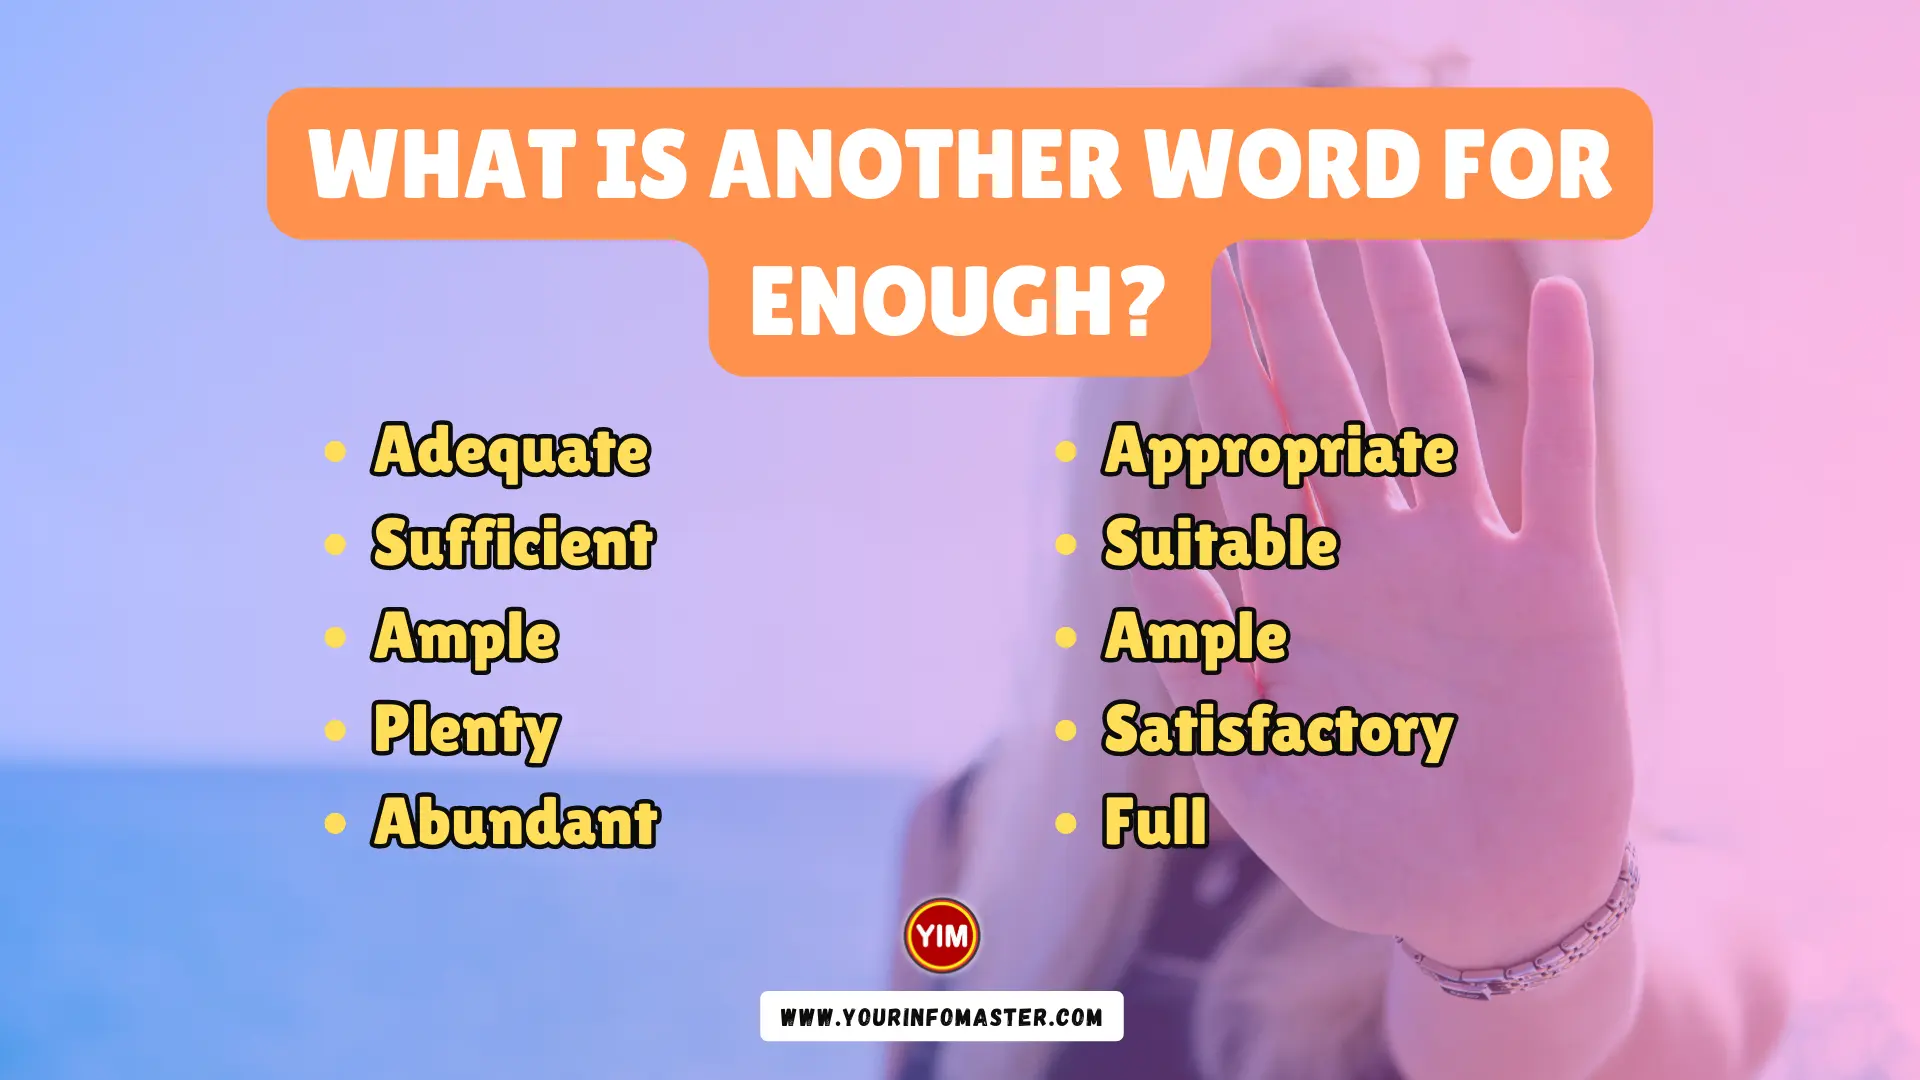 What is another word for Enough